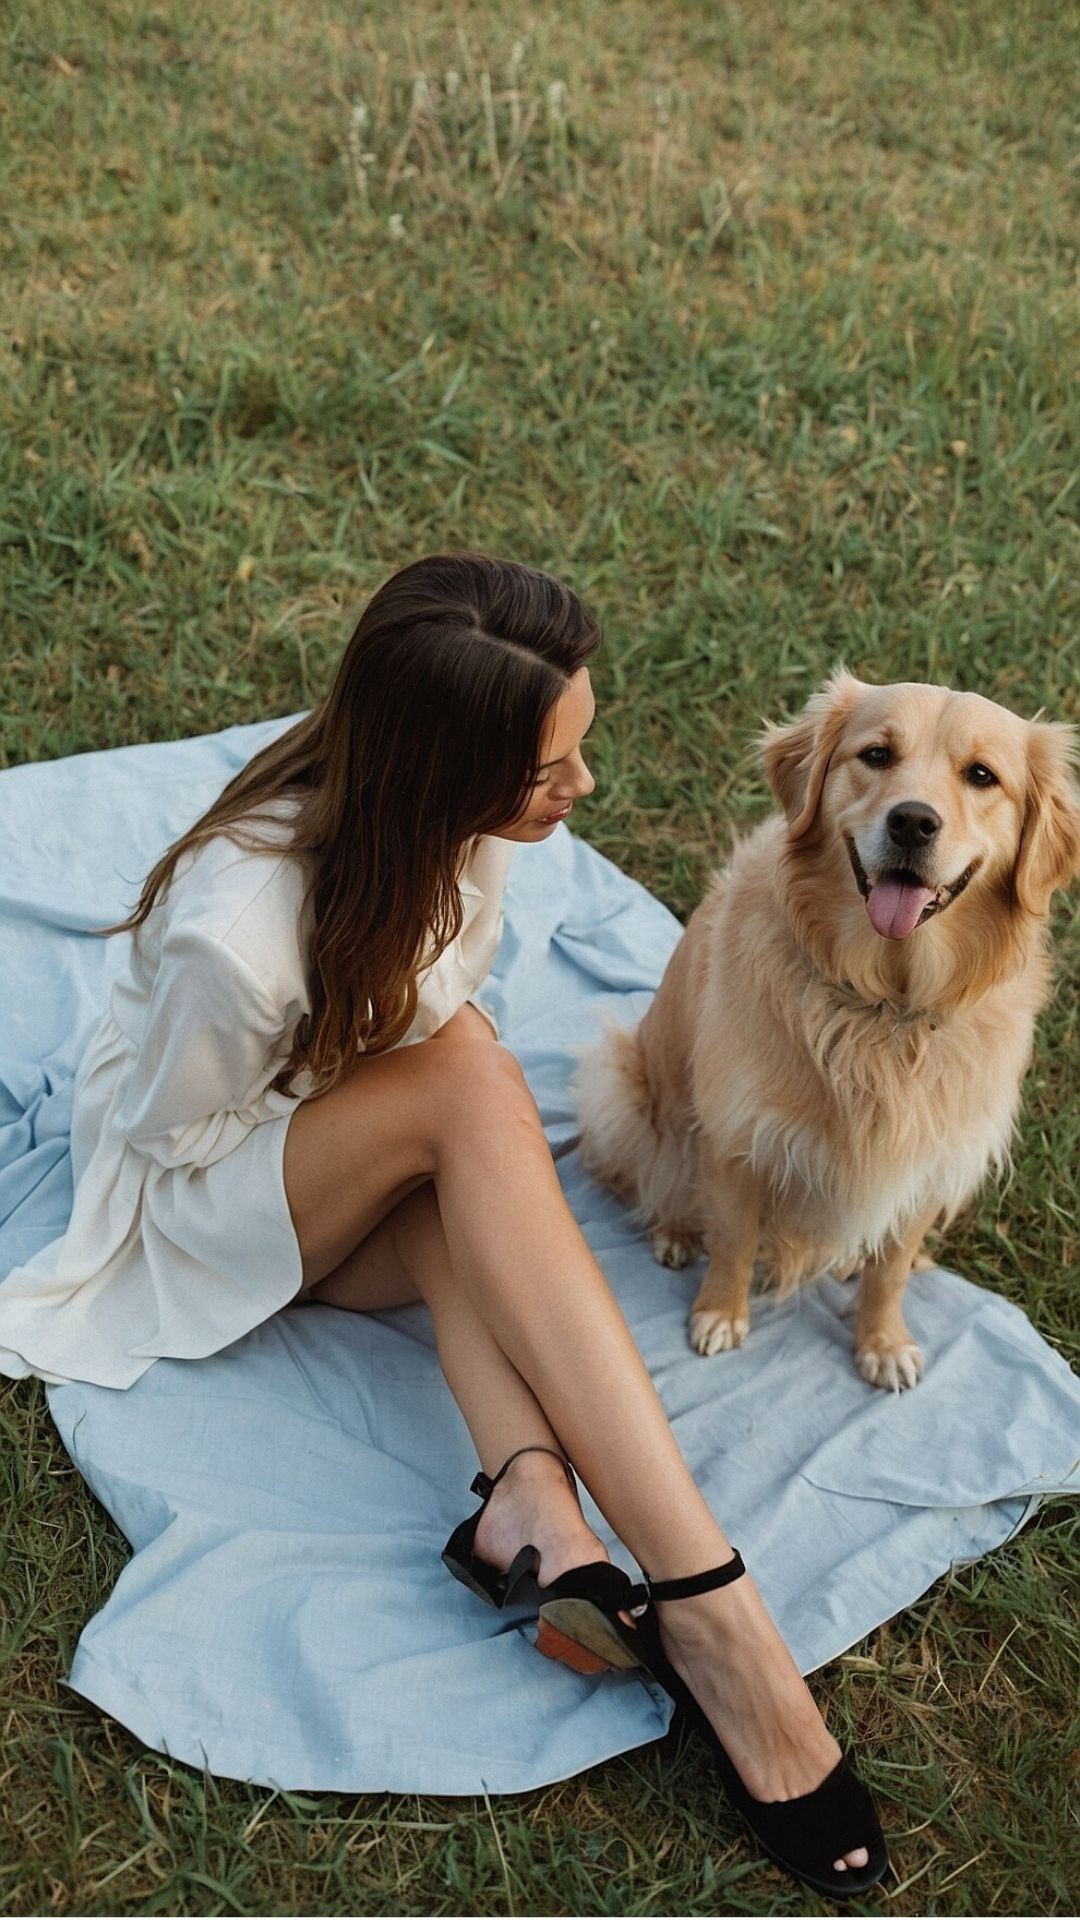 Field Day Fashion: Effortless Style with a Playful Pup